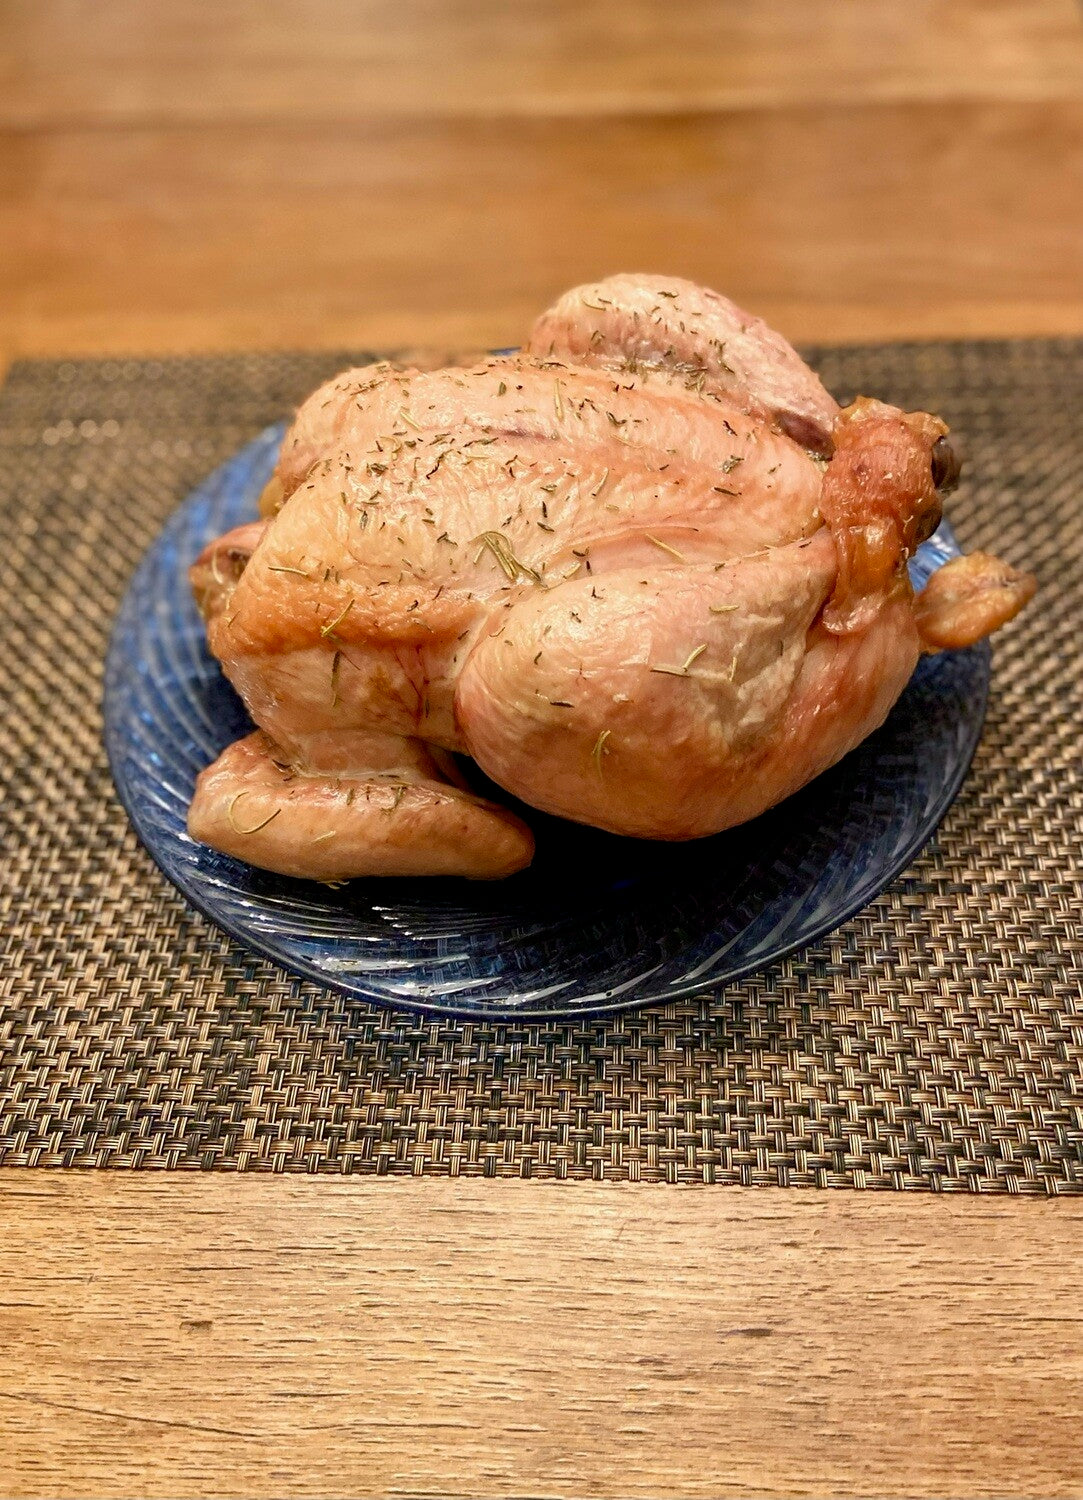 Roasted organic chicken ready to eat